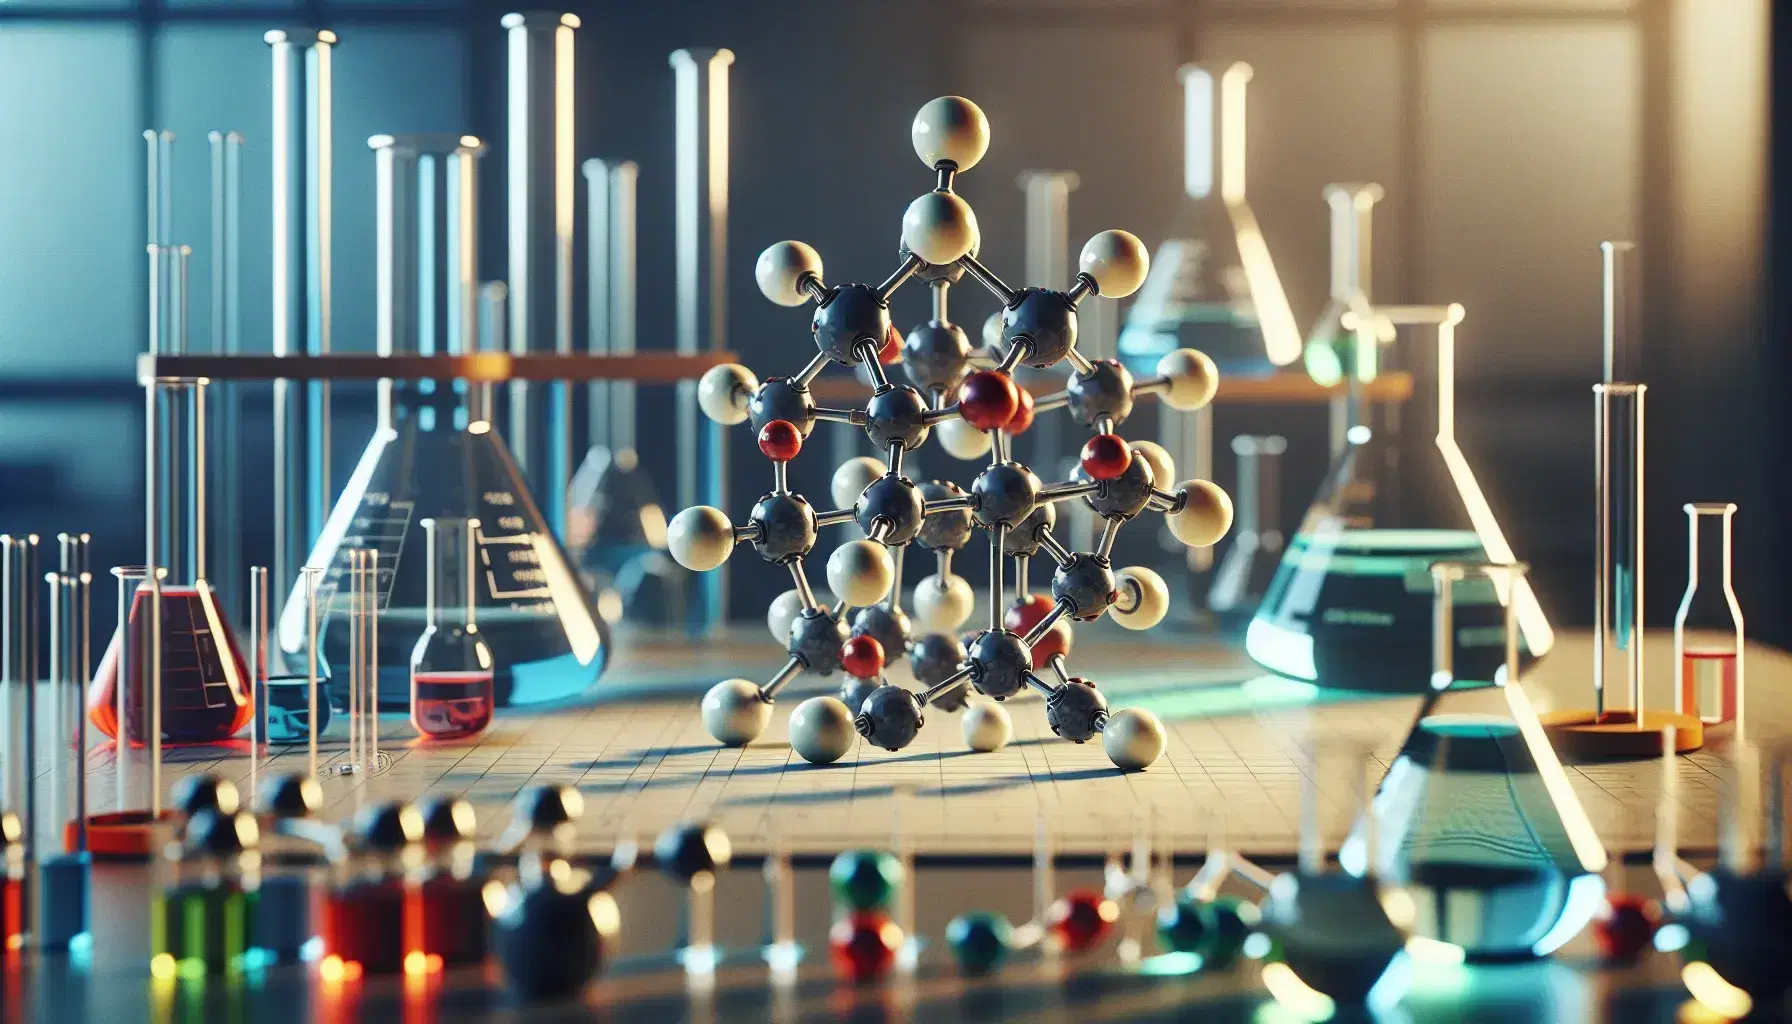 Three-dimensional molecular model with multicolored atoms linked by bonds in a laboratory, surrounded by scientific glassware on a benchtop.